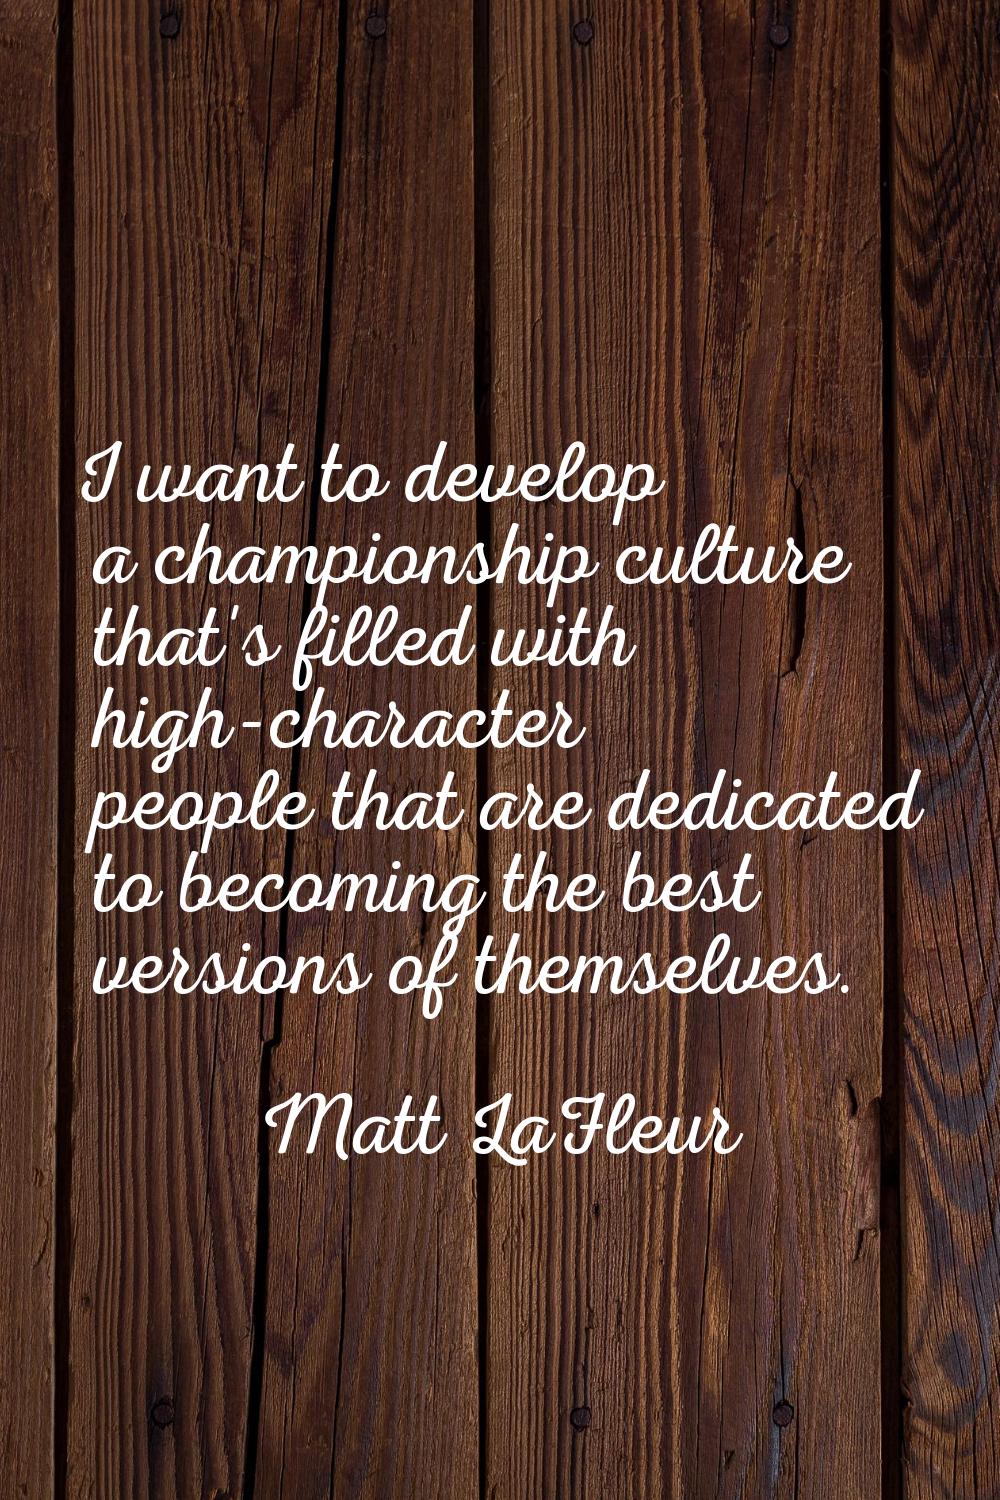 I want to develop a championship culture that's filled with high-character people that are dedicate